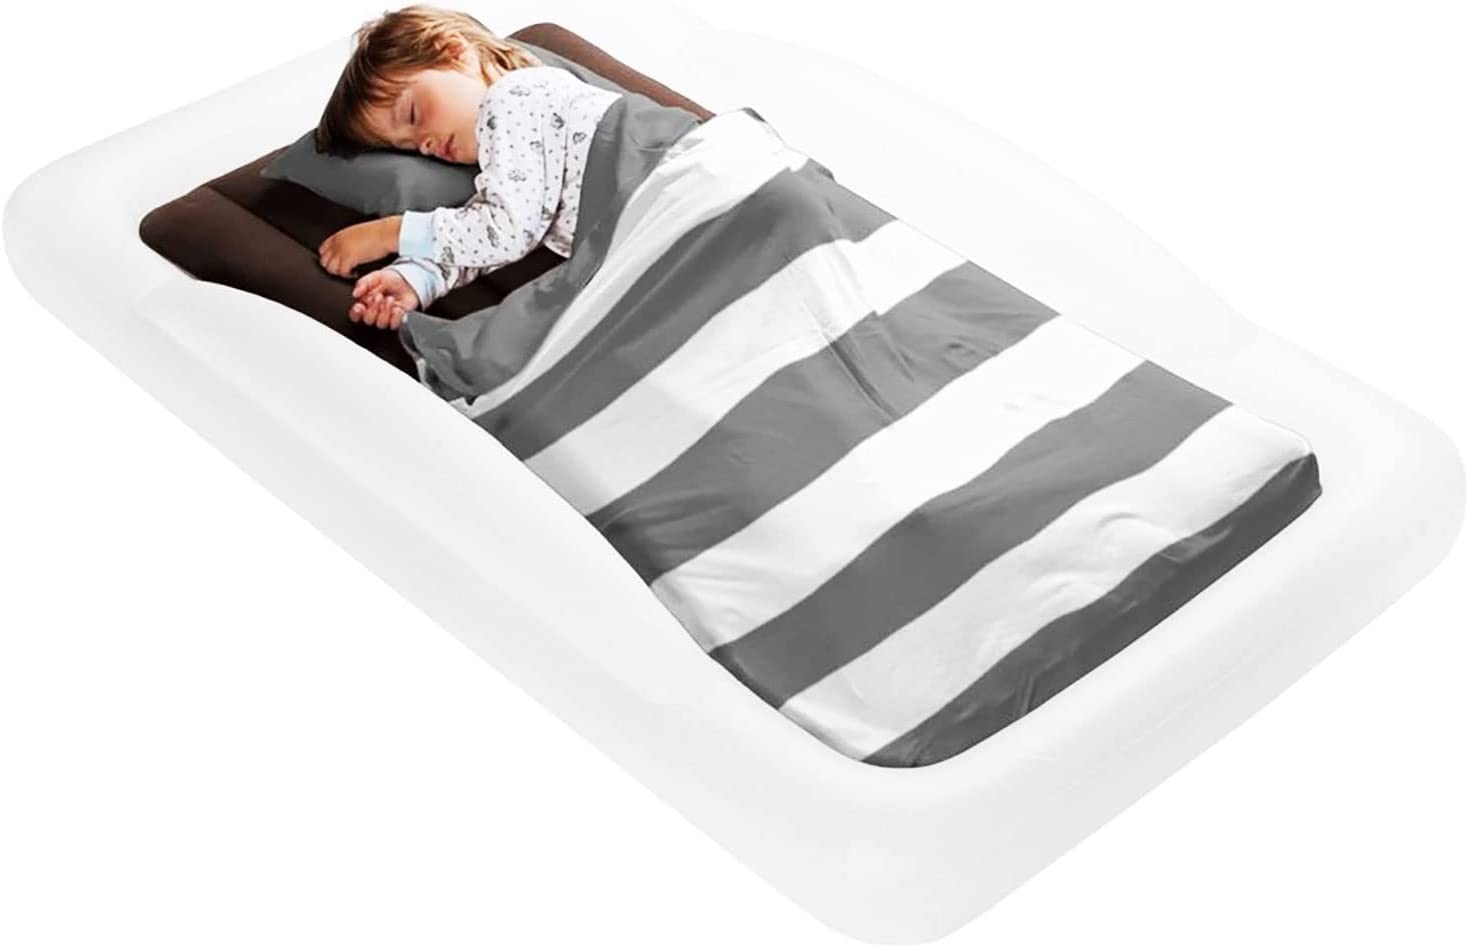 The Shrunks Toddler Travel Bed | Portable Inflatable Kids Air Mattress | Blow Up Bed for Indoor/Outdoor Camping, Hotel, or Home Use | Toddler Air Mattress Floor Bed with Bed Rails and Electric Pump